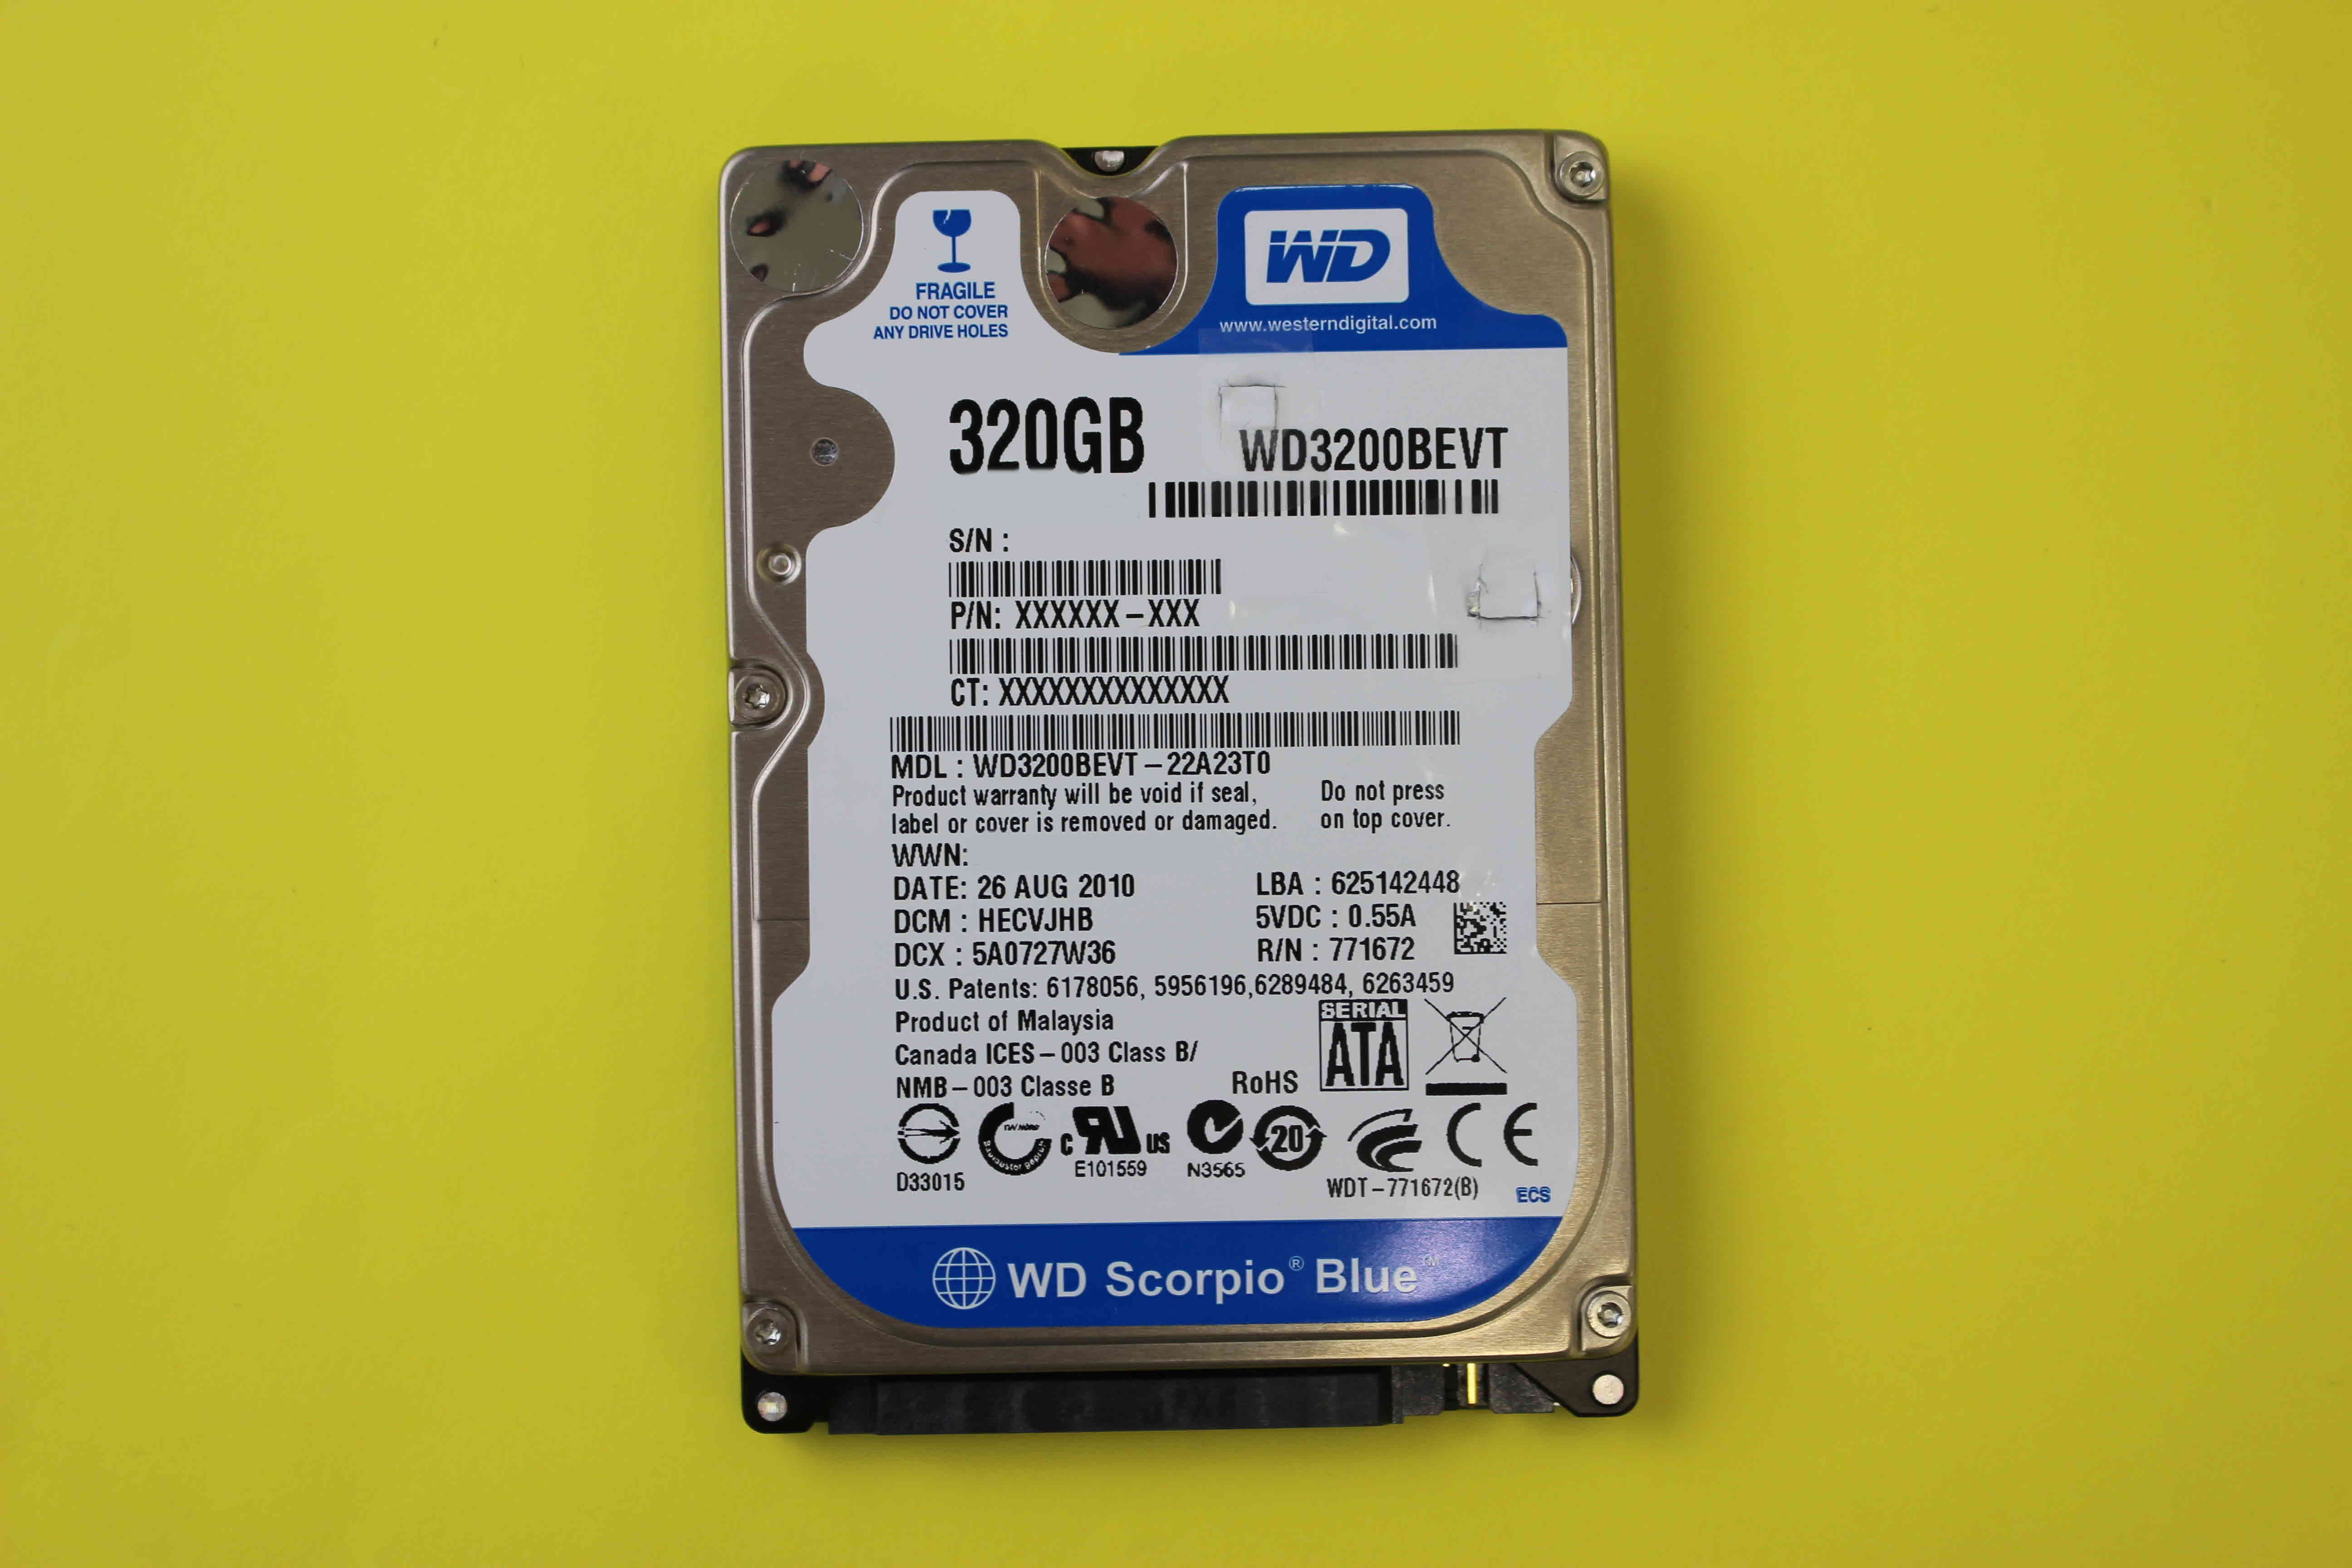 wd3200bevt-22a23t0-recovery